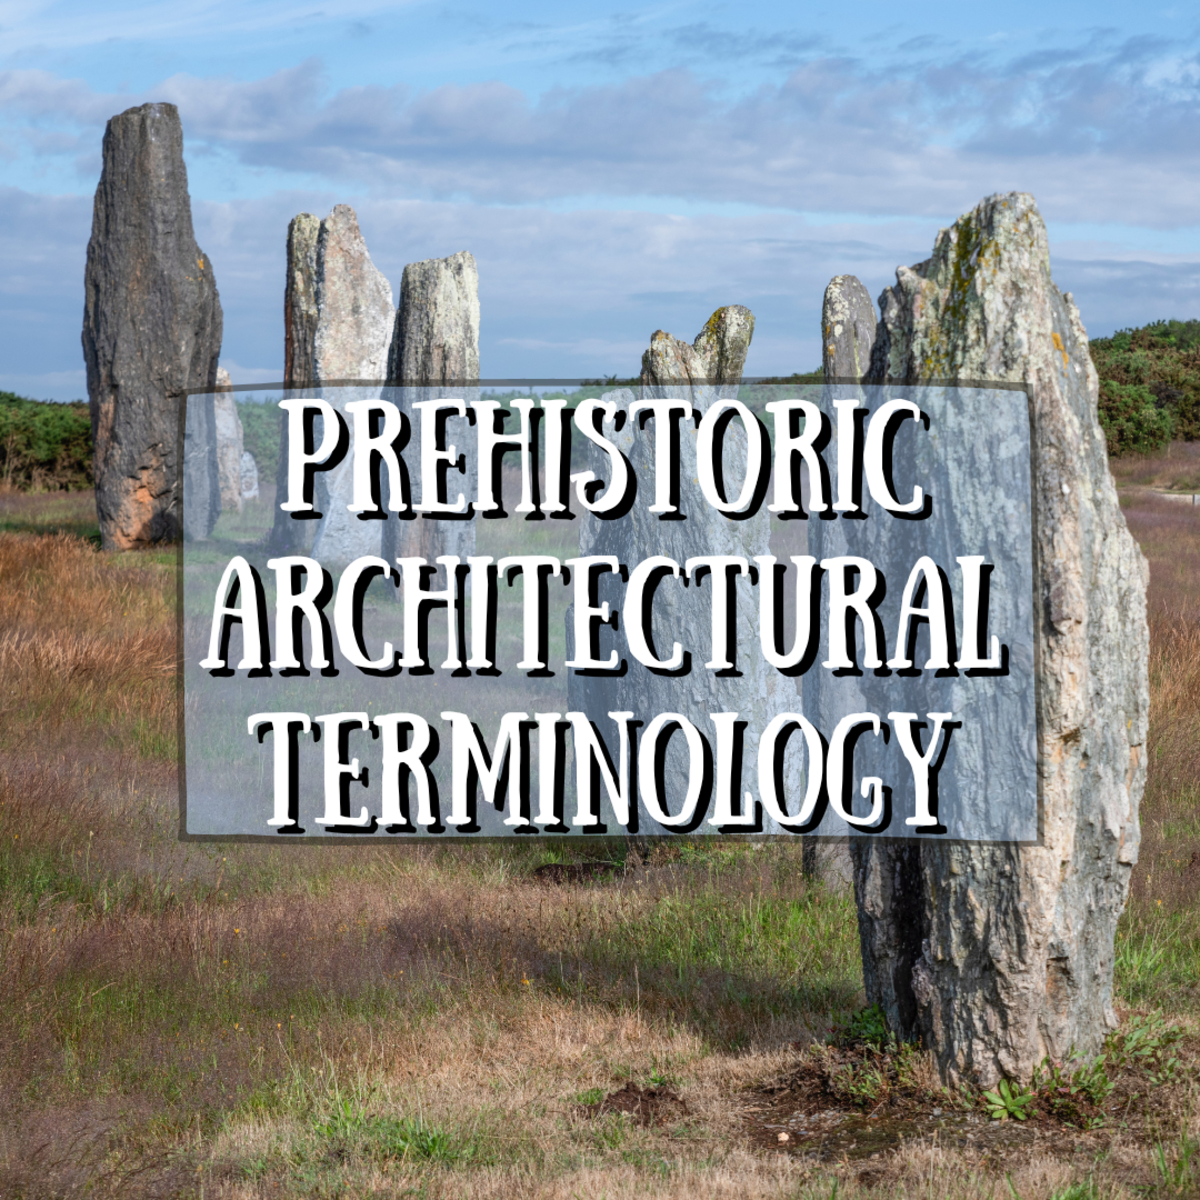 Read on to learn about prehistoric architecture terminologies. You'll find 23 prehistoric architectural terms here!